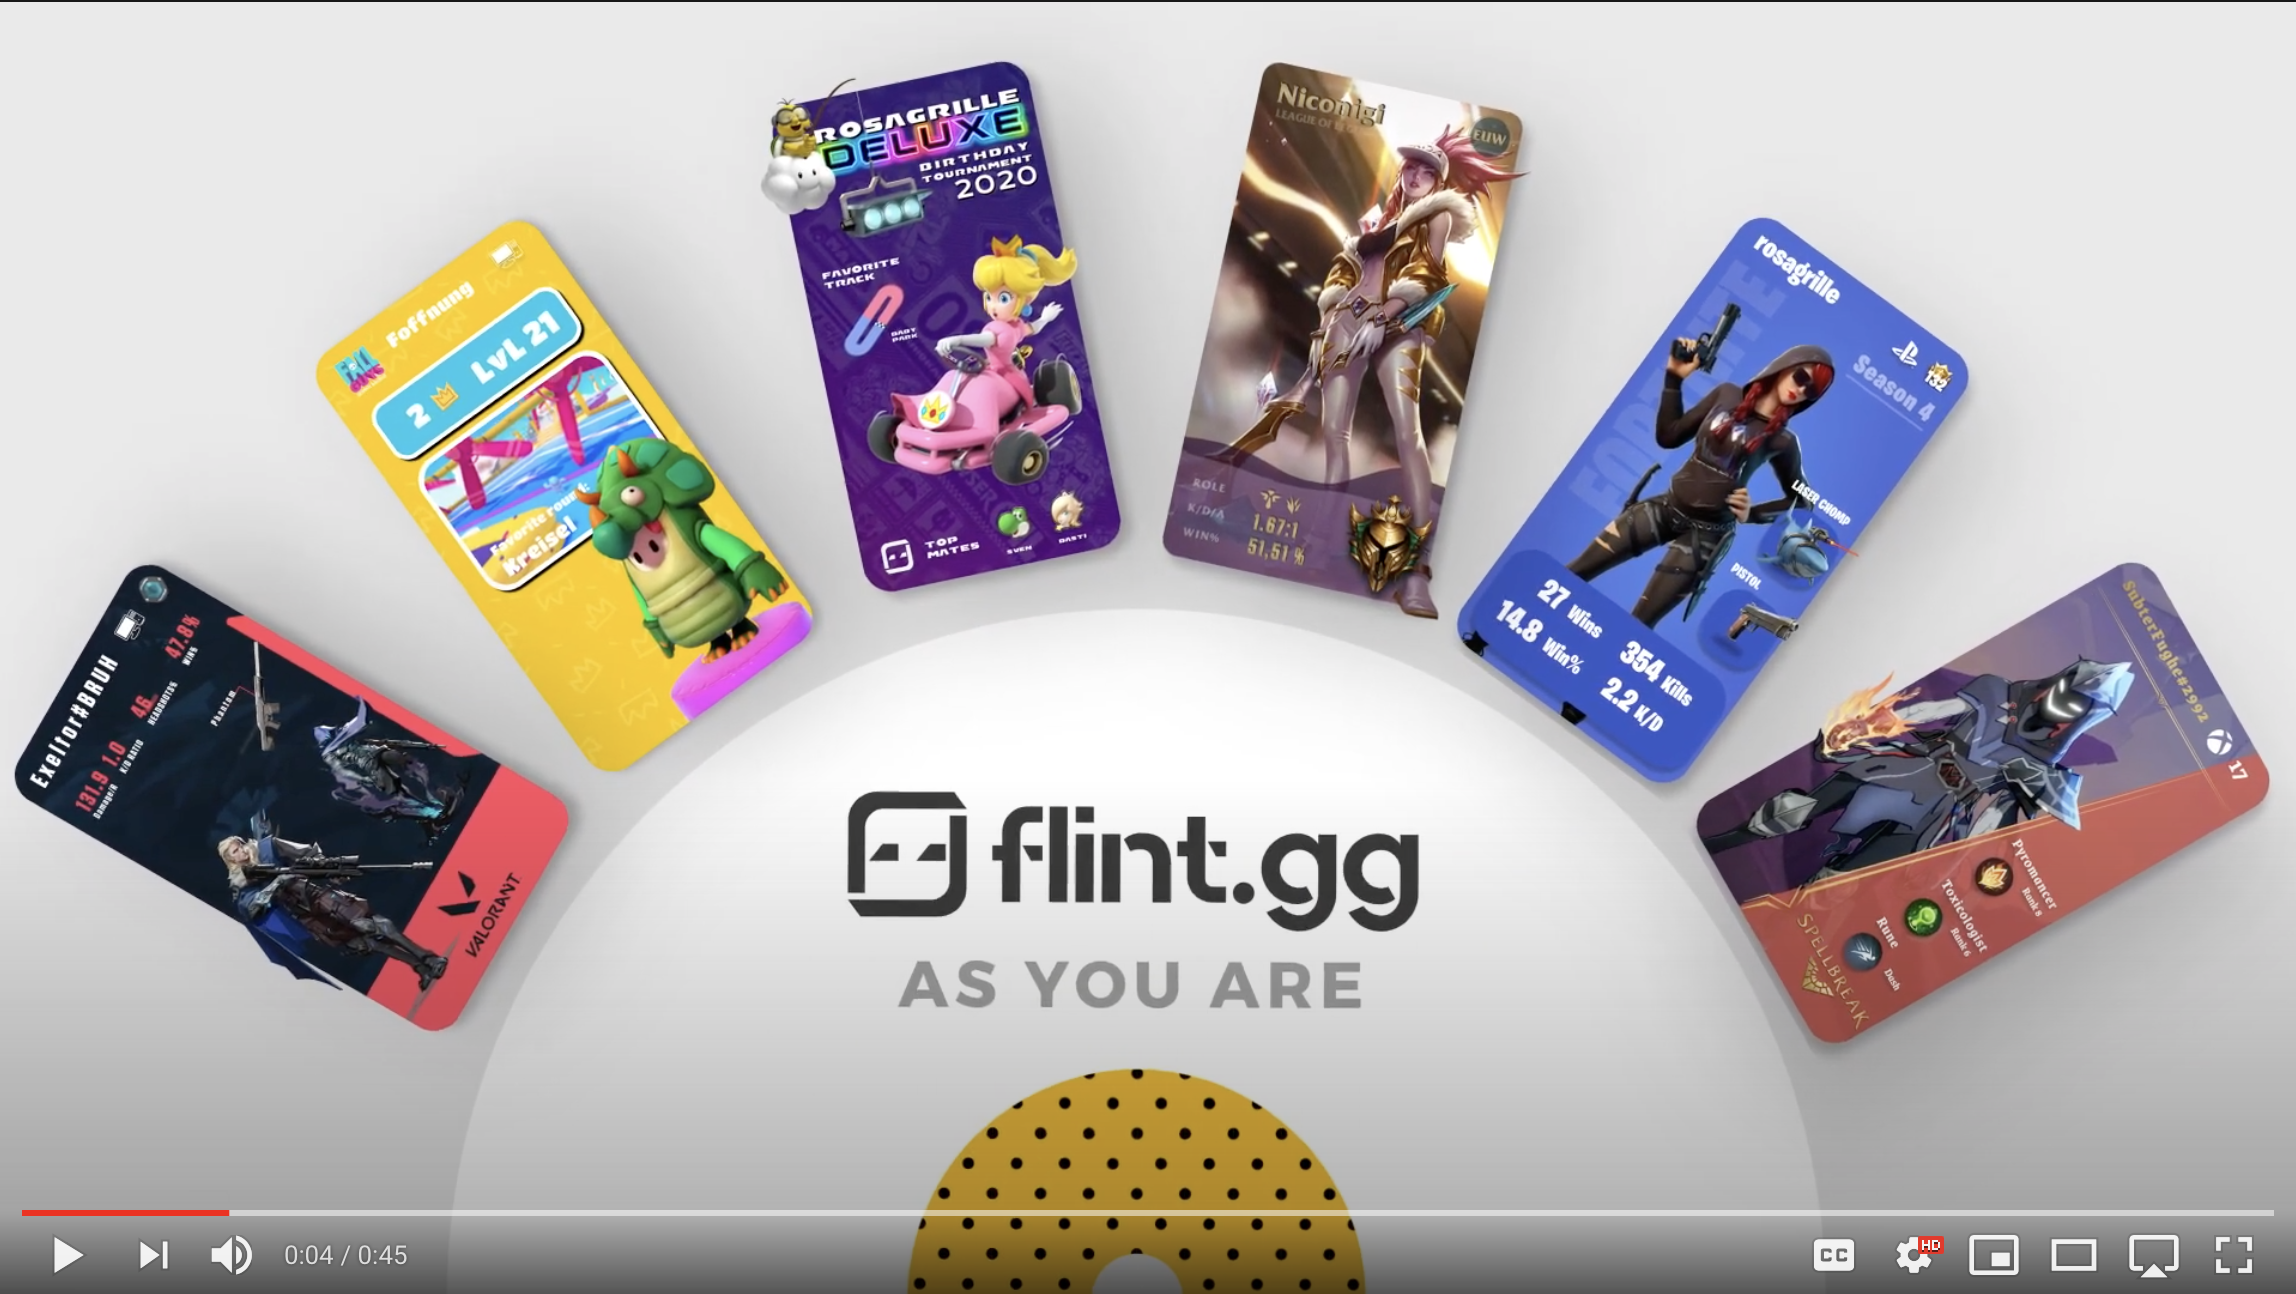 – The Home of your Gaming Identity